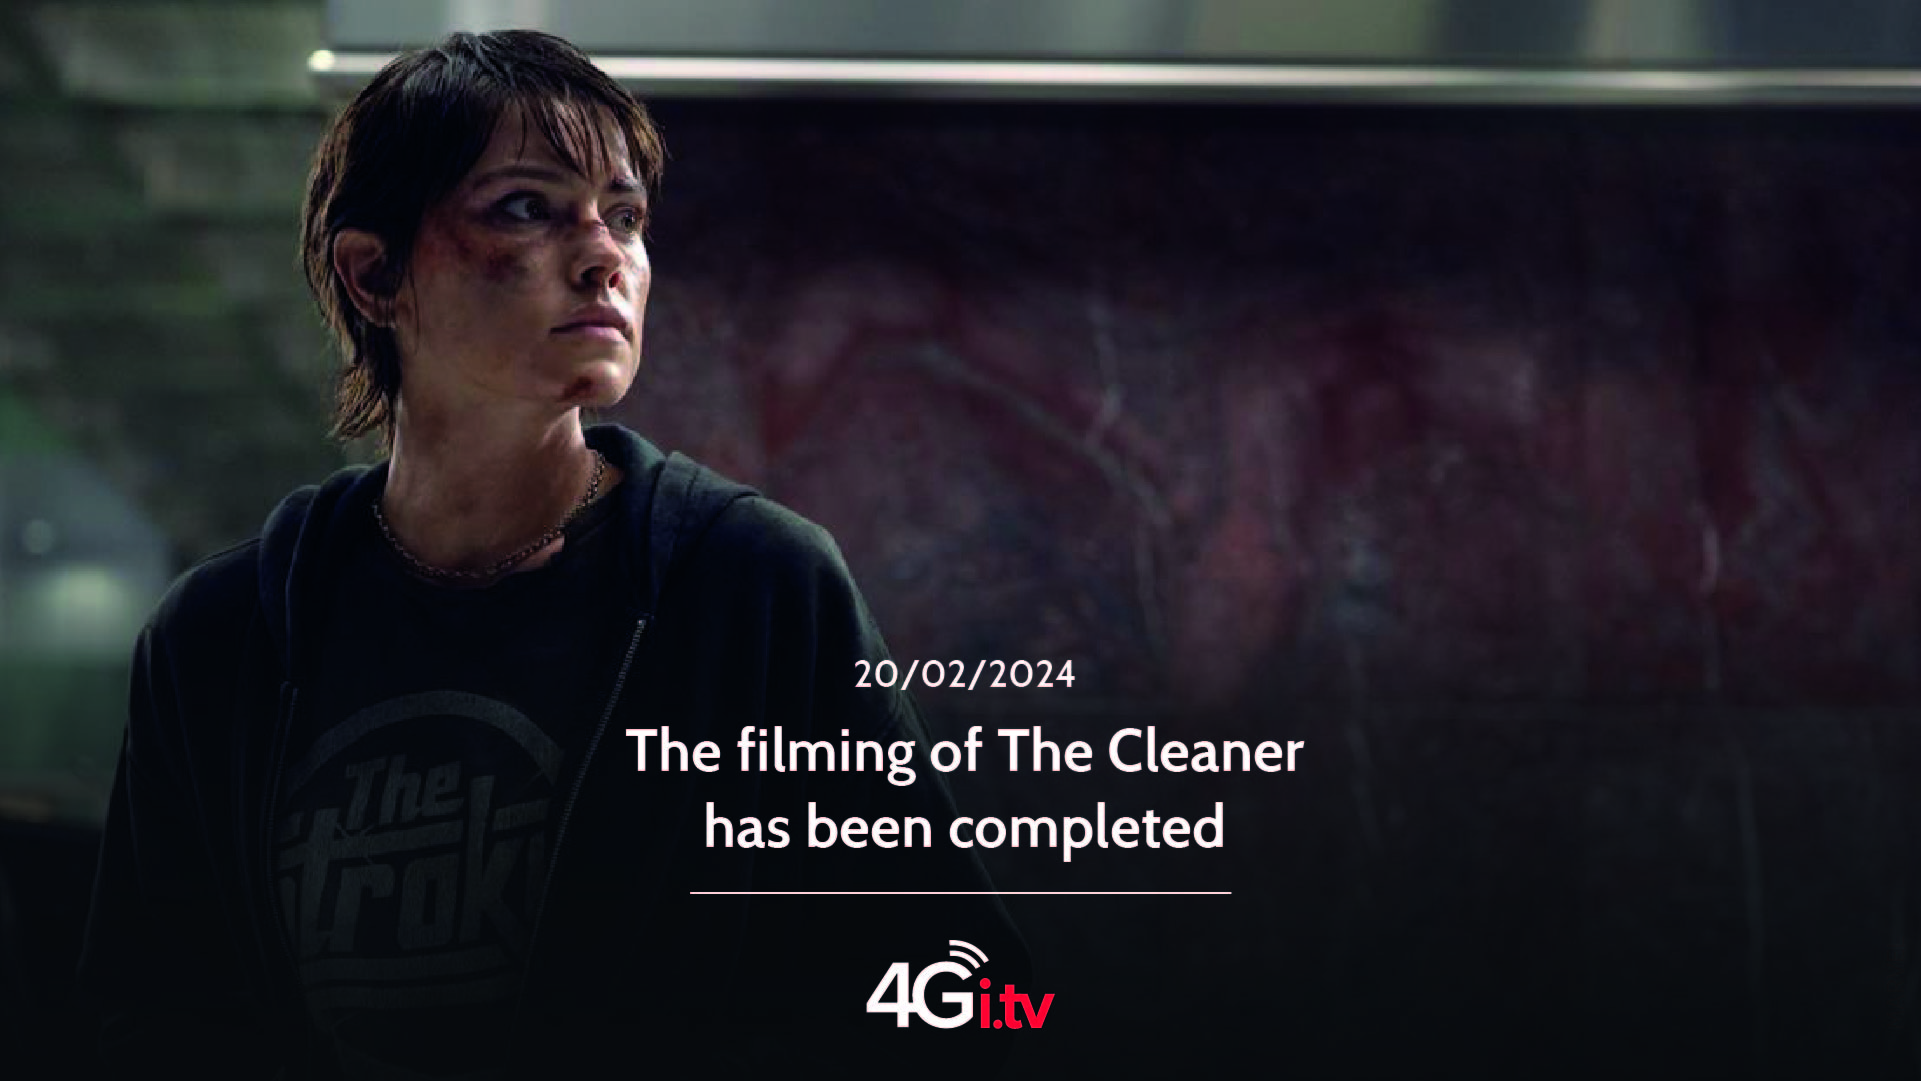 Подробнее о статье The filming of The Cleaner has been completed